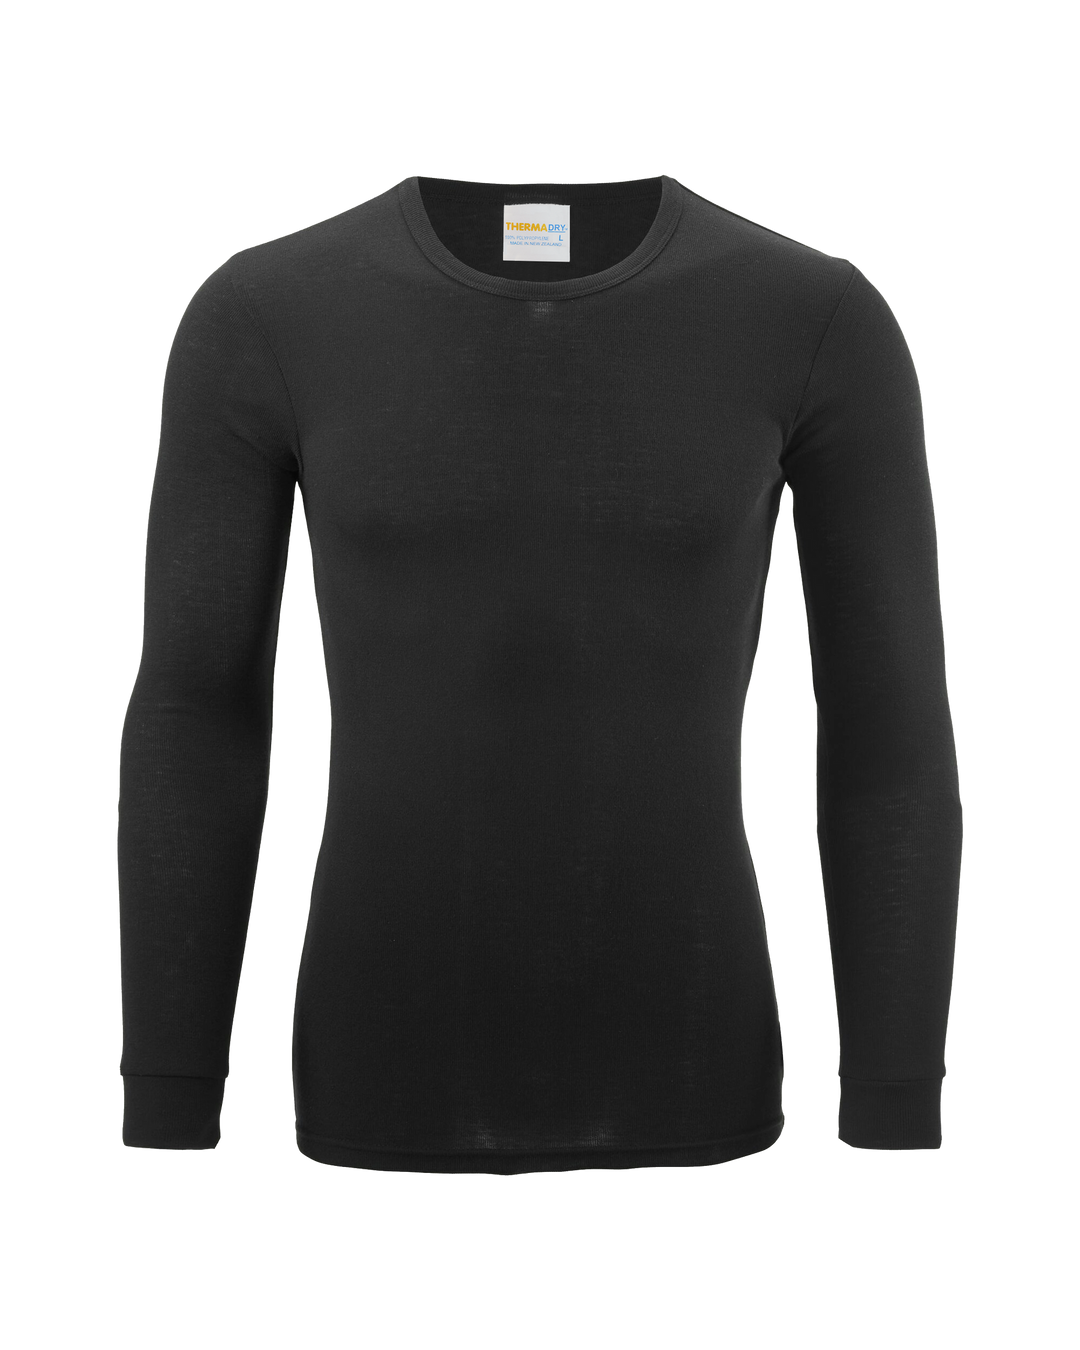 Thermadry Long-Sleeved Polypro Thermal Top